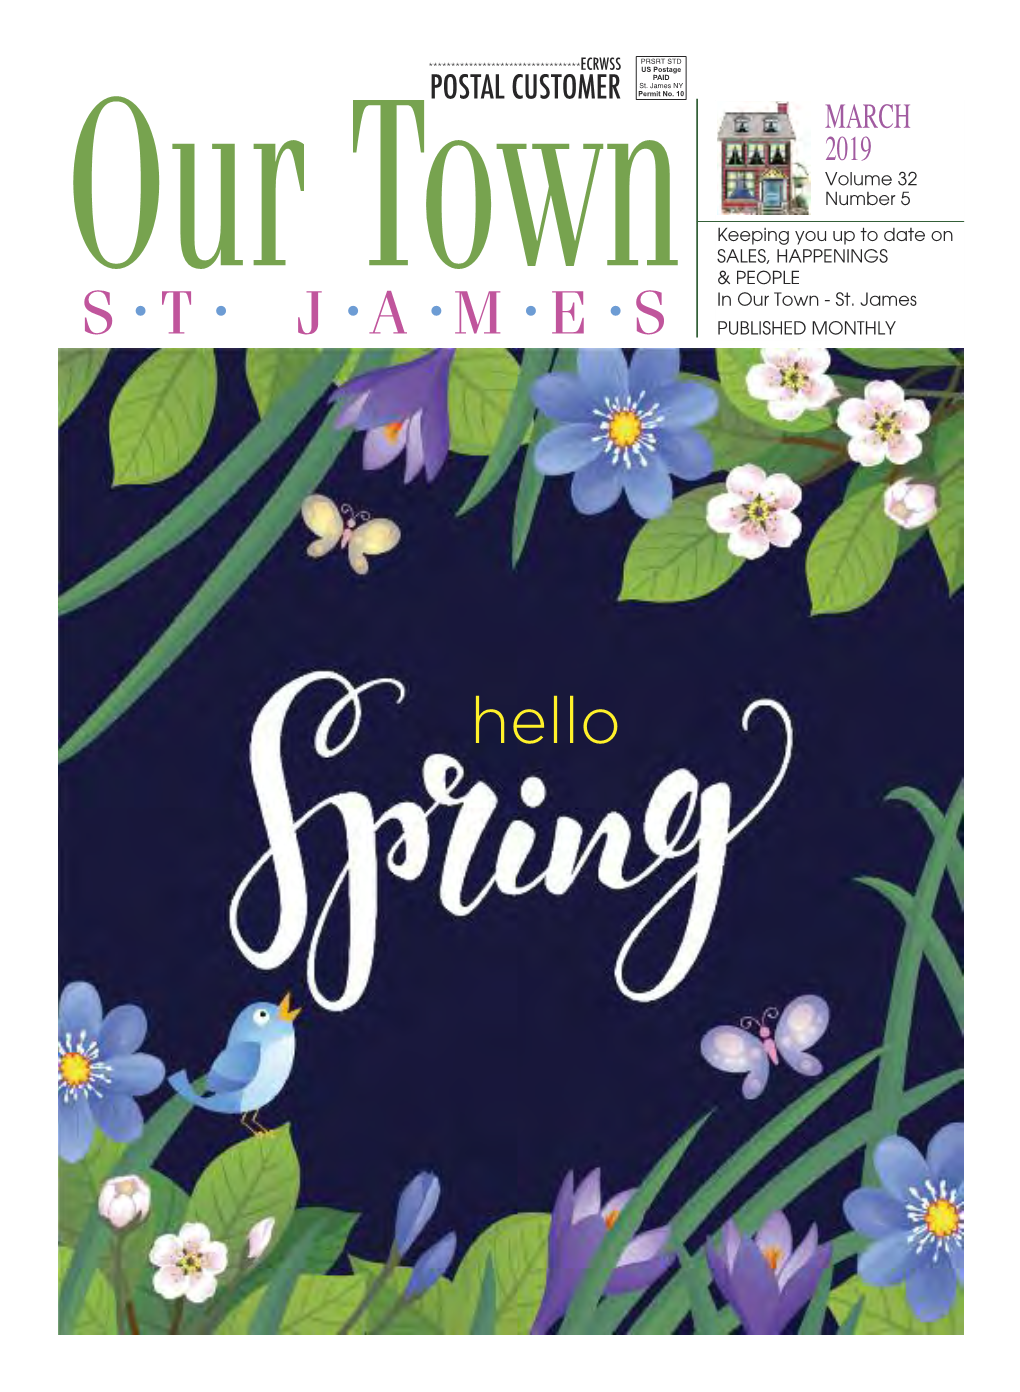 MARCH 2019 Volume 32 Number 5 Keeping You up to Date on SALES, HAPPENINGS Our Town & PEOPLE • • • • • • in Our Town - St